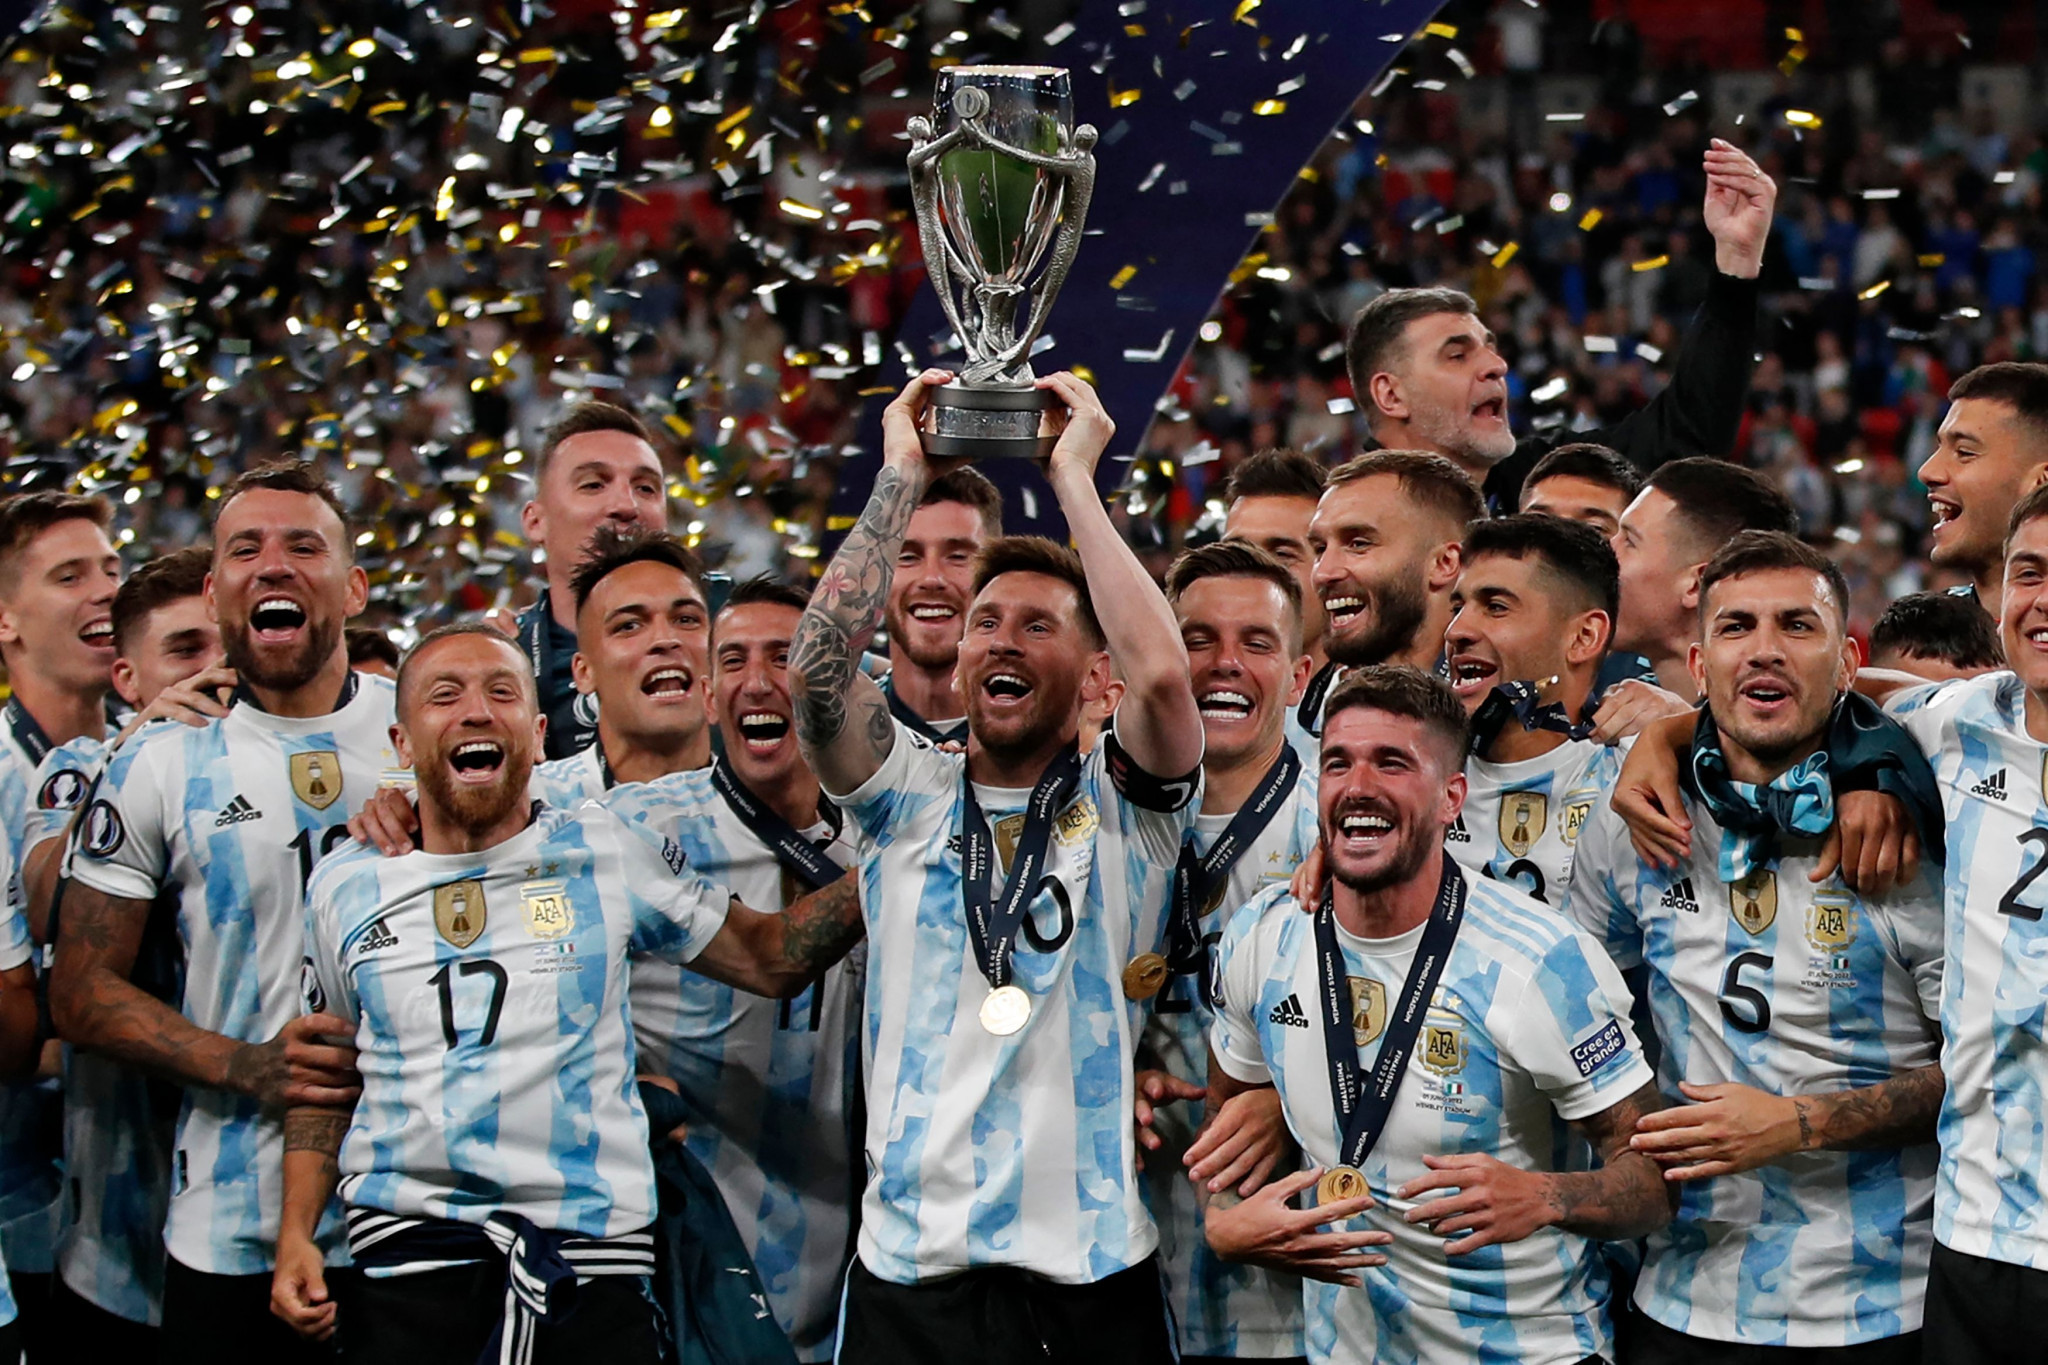 Argentina cruise past Italy to win Finalissima at Wembley